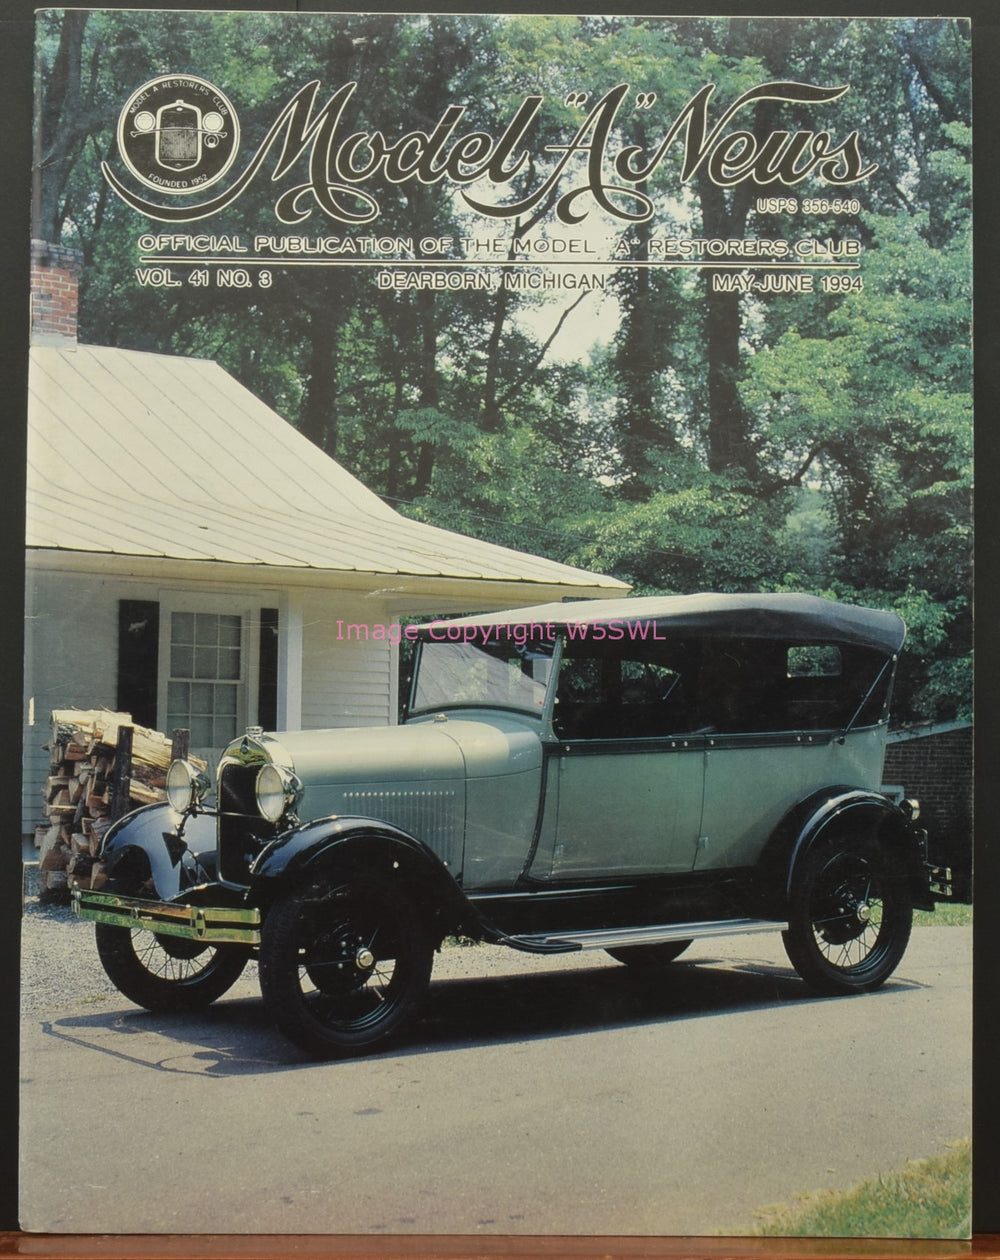 Model A News Restorers Club Vol 41 No 3 May-June 1994 - Dave's Hobby Shop by W5SWL